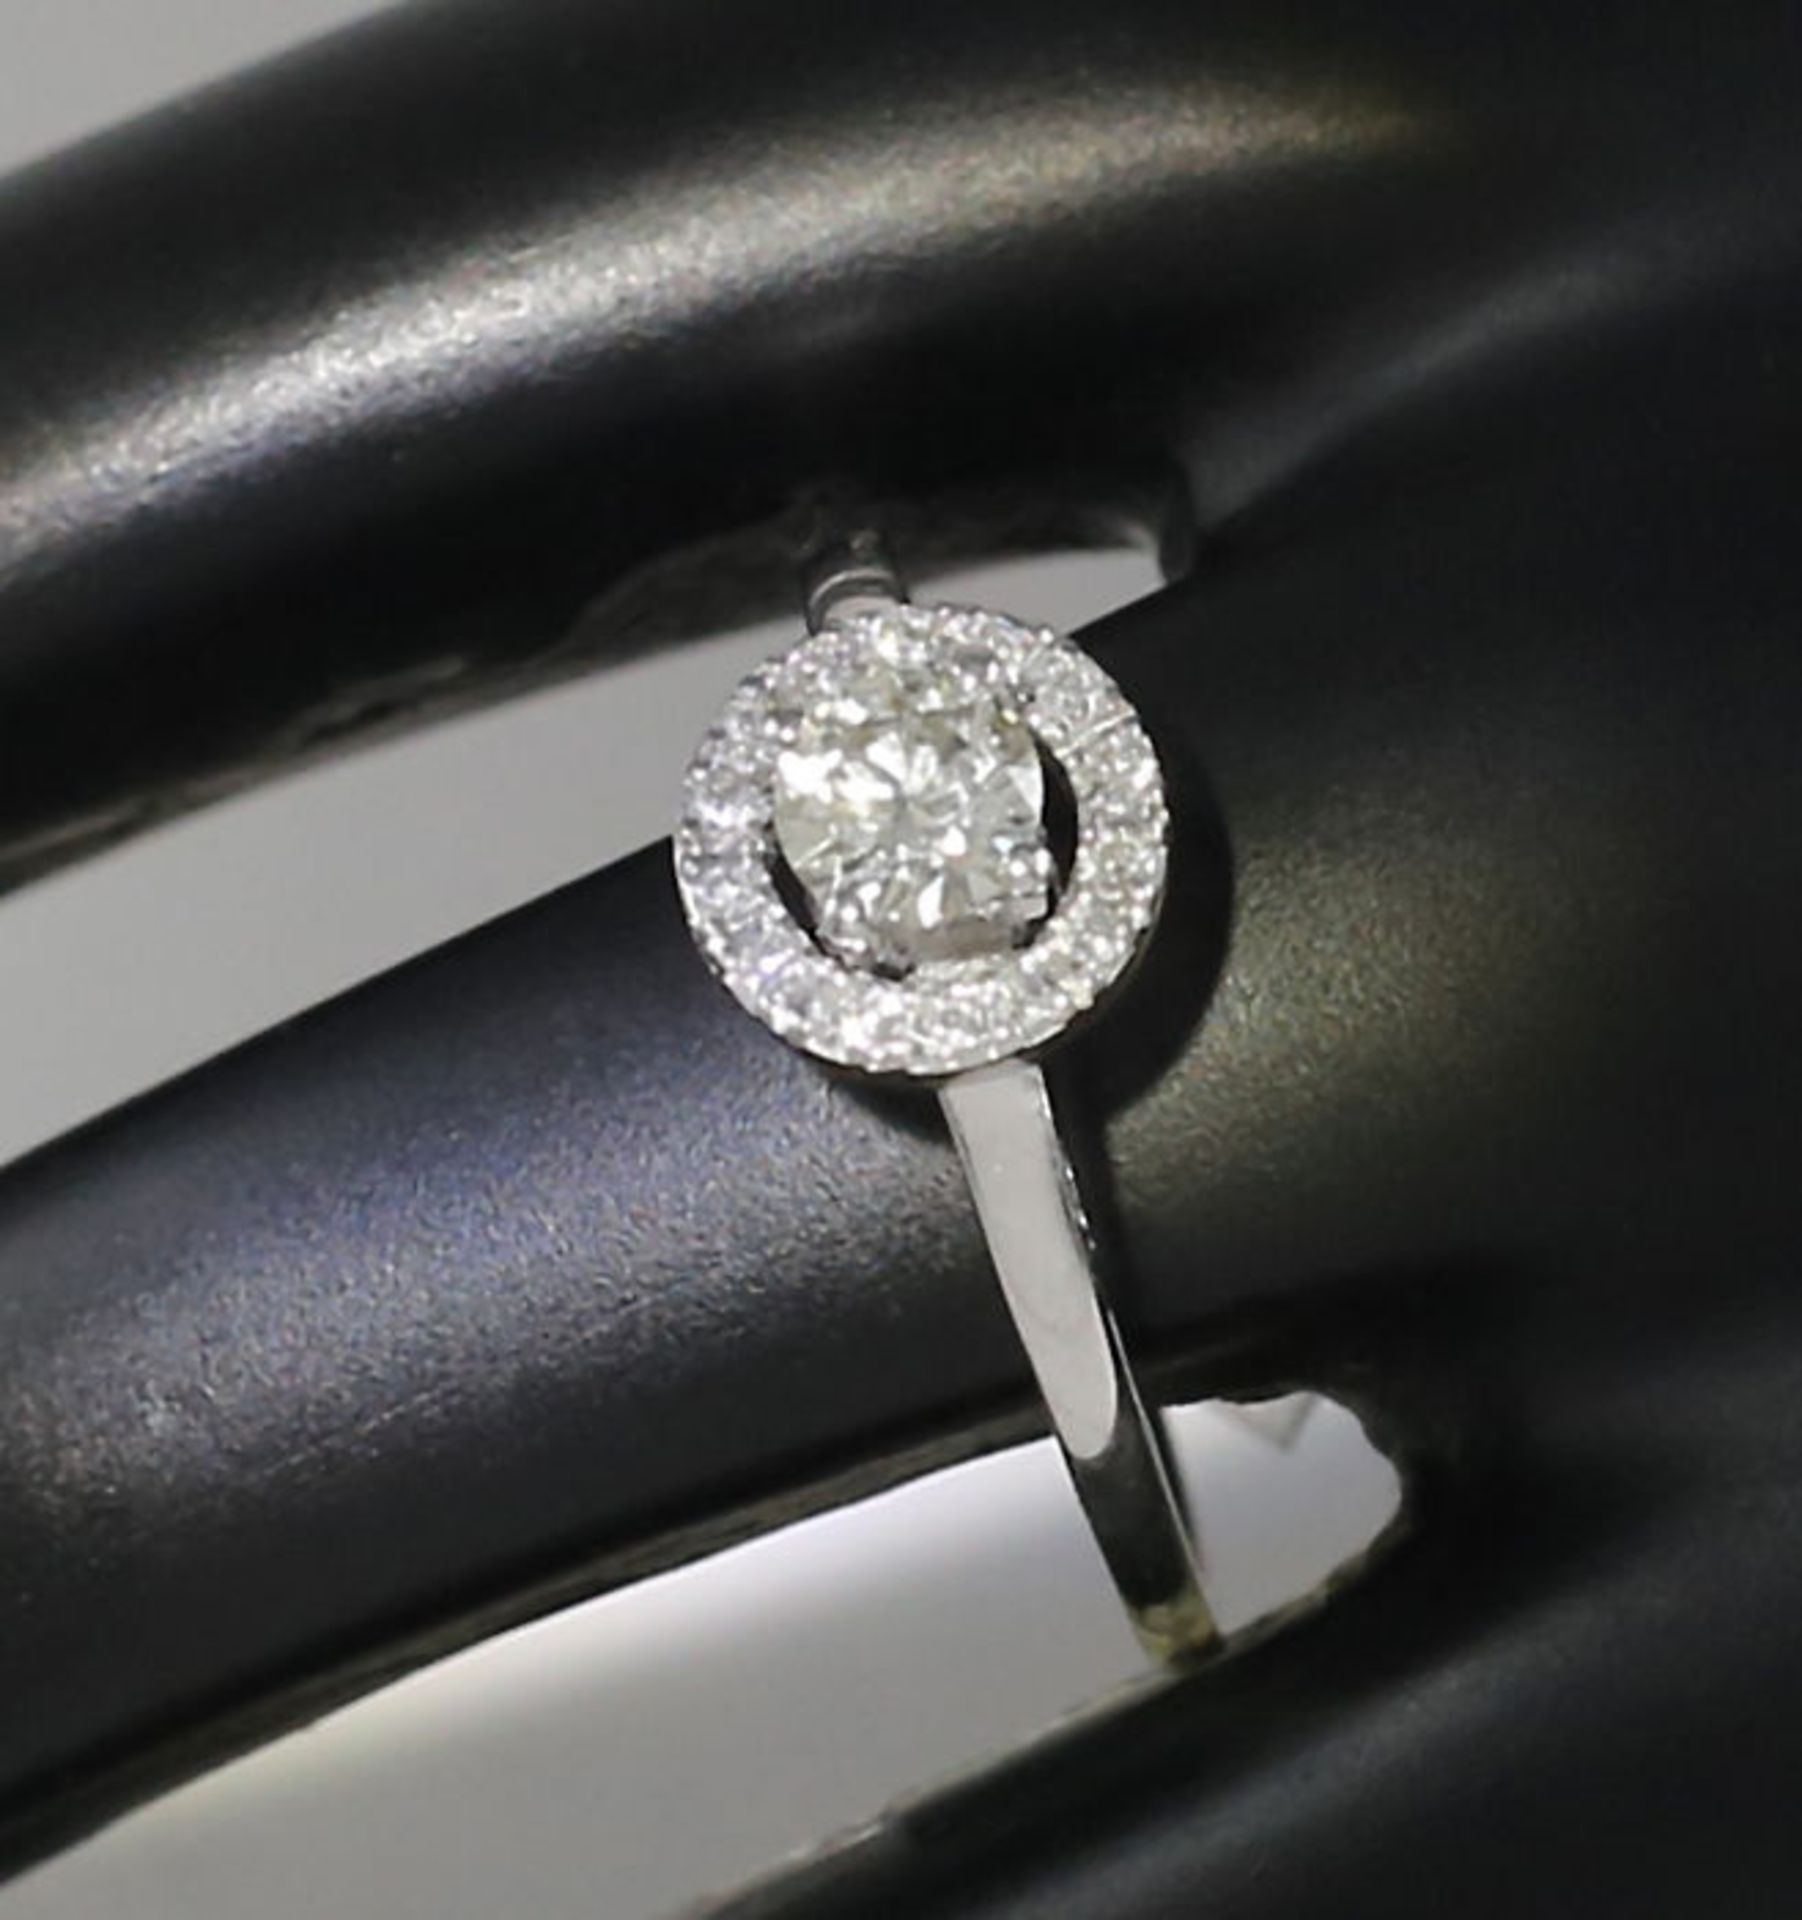 14 K / 585 White Gold Solitaire Diamond Ring - Image 5 of 7